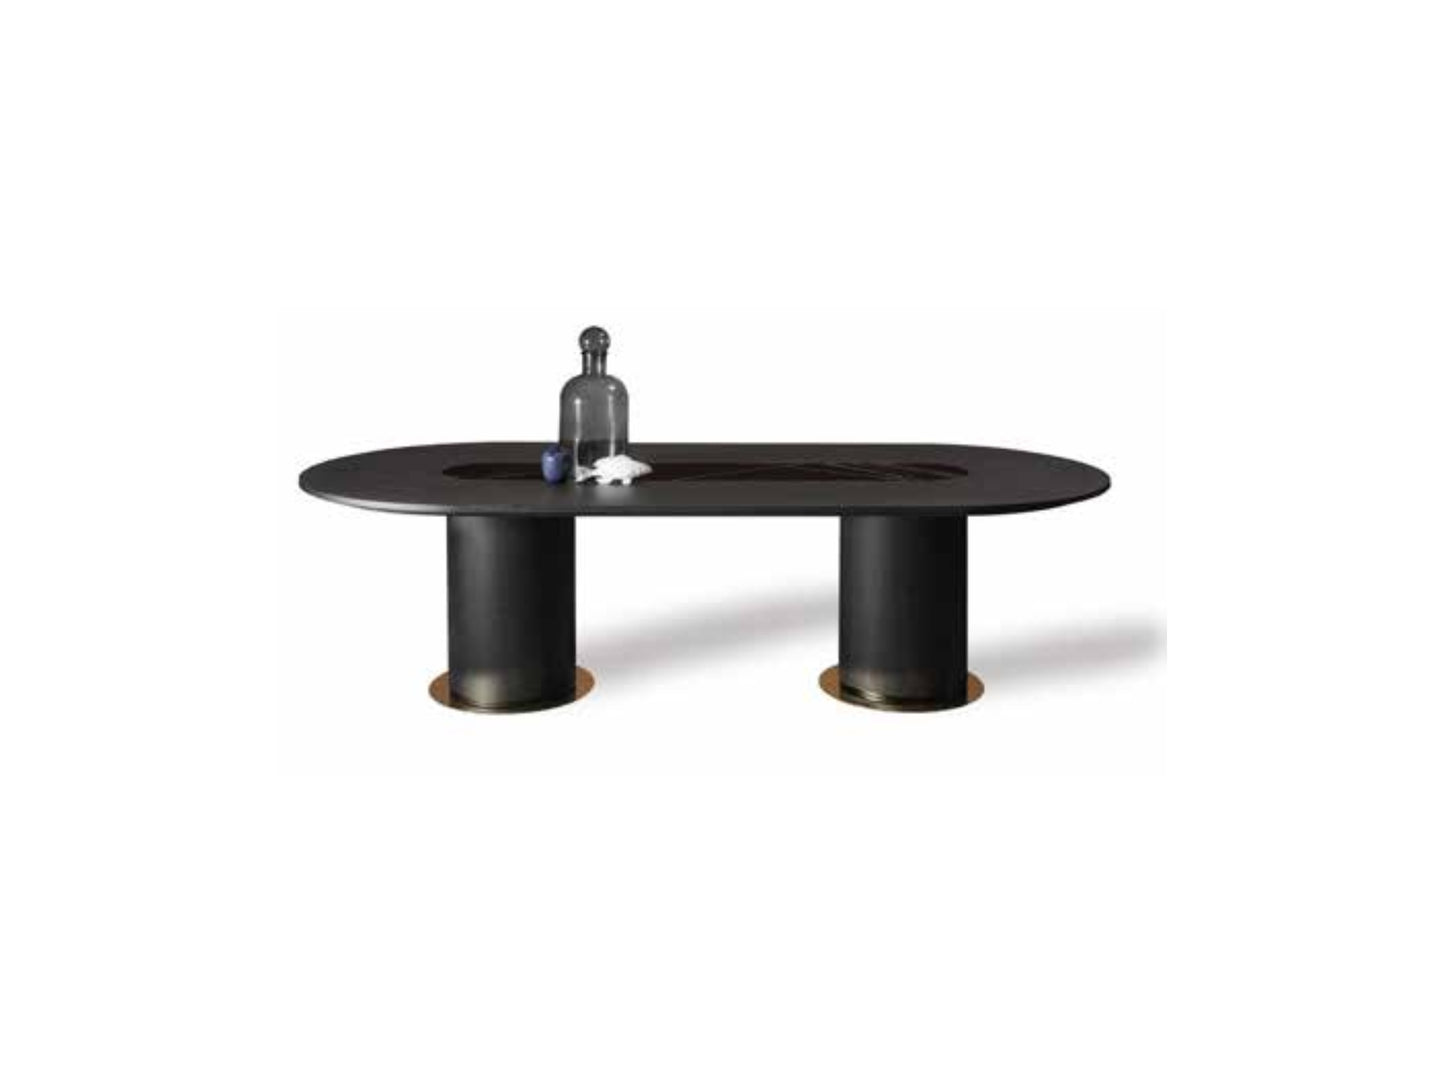 4200 CIRCLE | Dining Table by Vibieffe $9,870.00